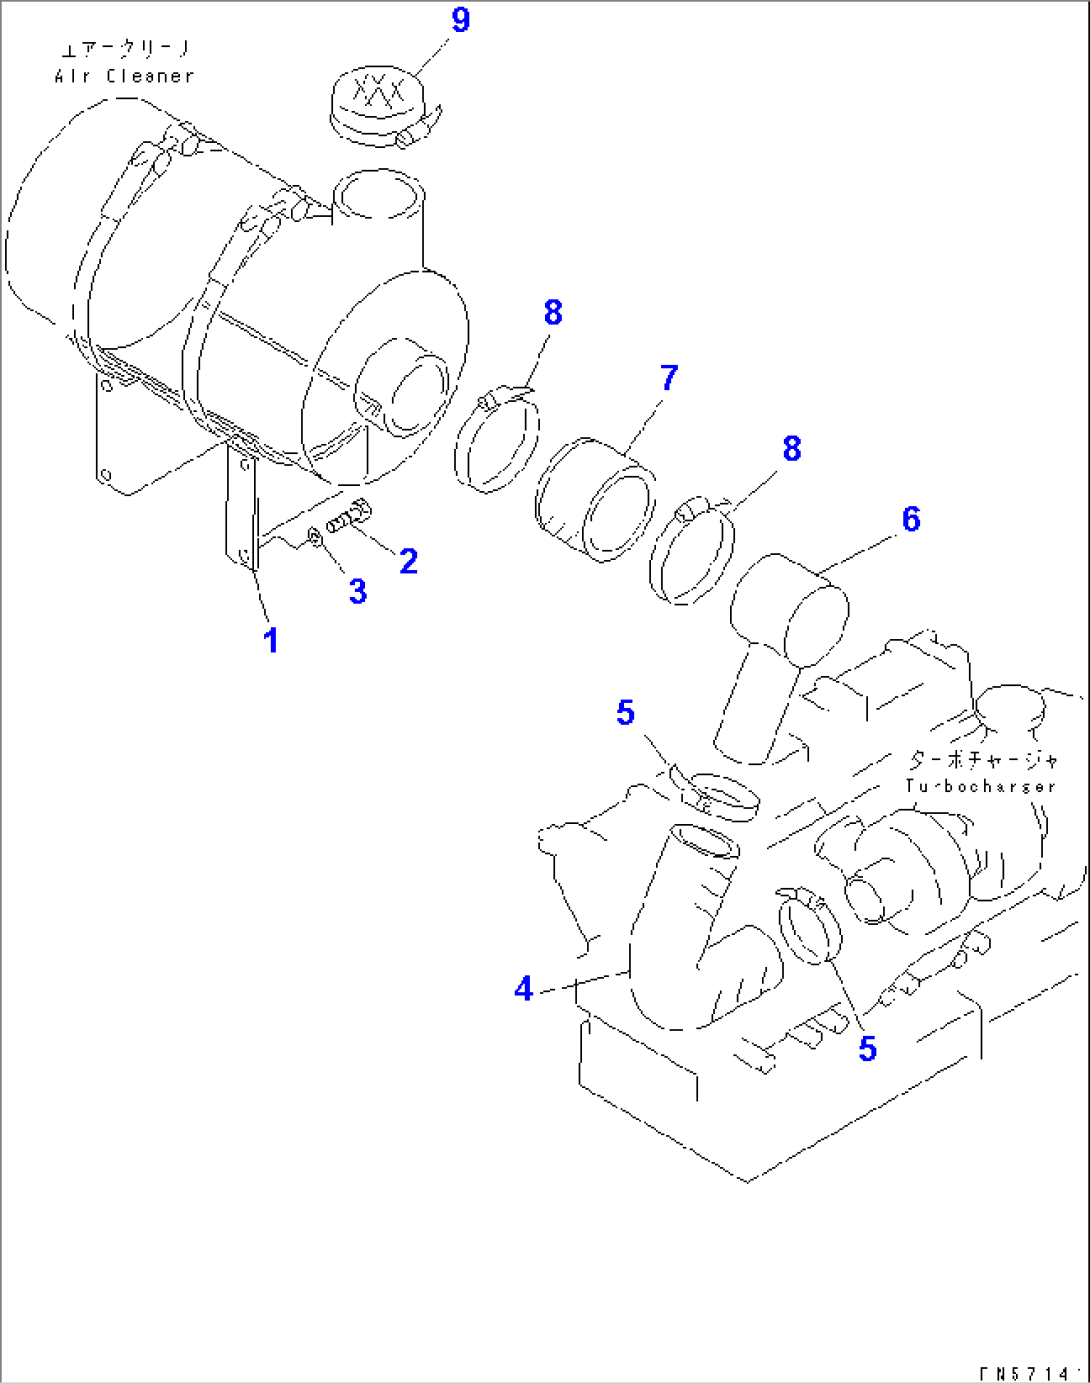 AIR CLEANER CONNECTION(#3401-)